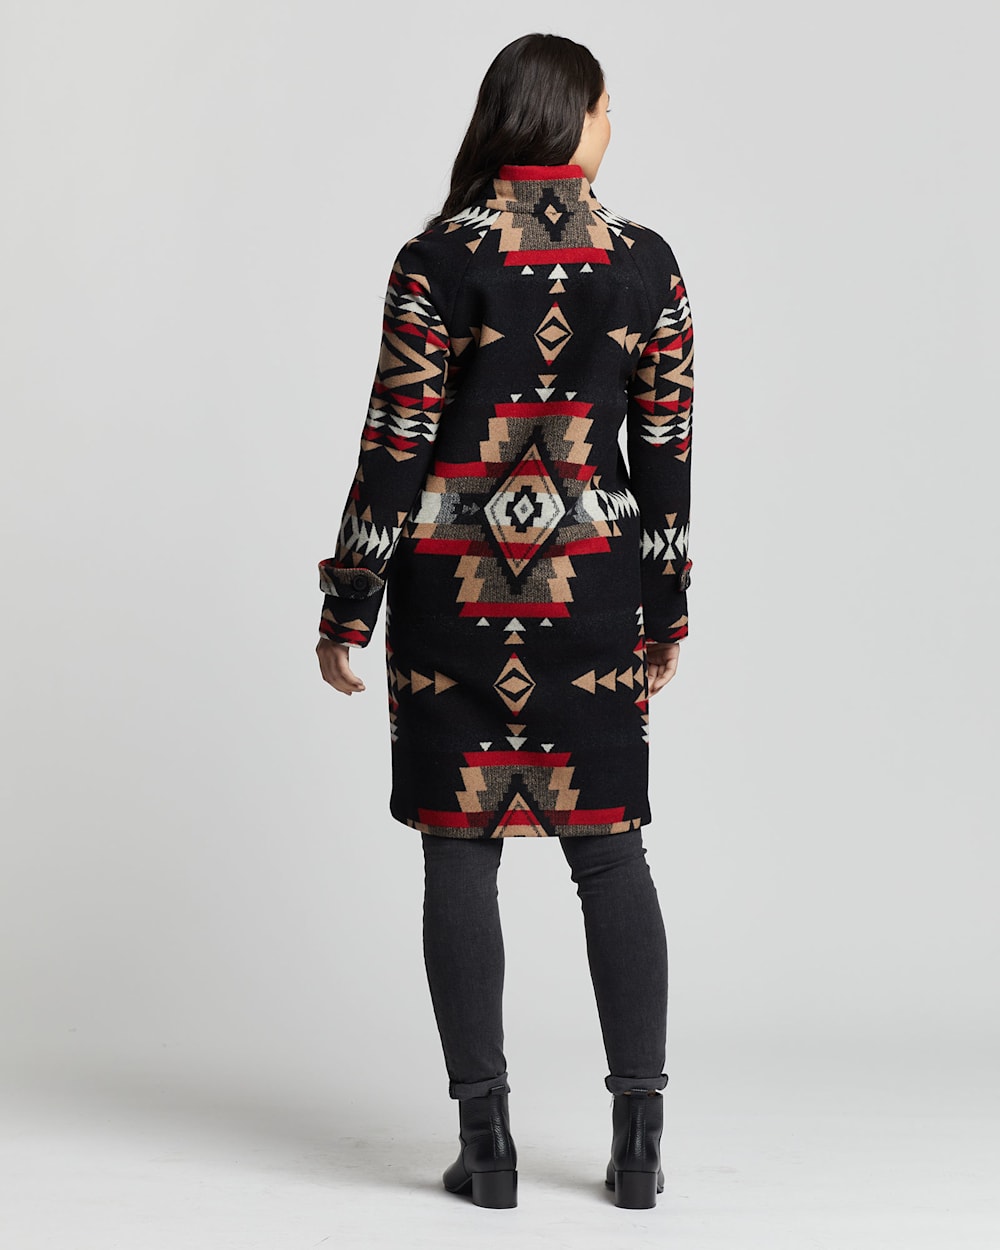 ALTERNATE VIEW OF WOMEN'S ROCK POINT ARCHIVE BLANKET COAT IN BLACK image number 2